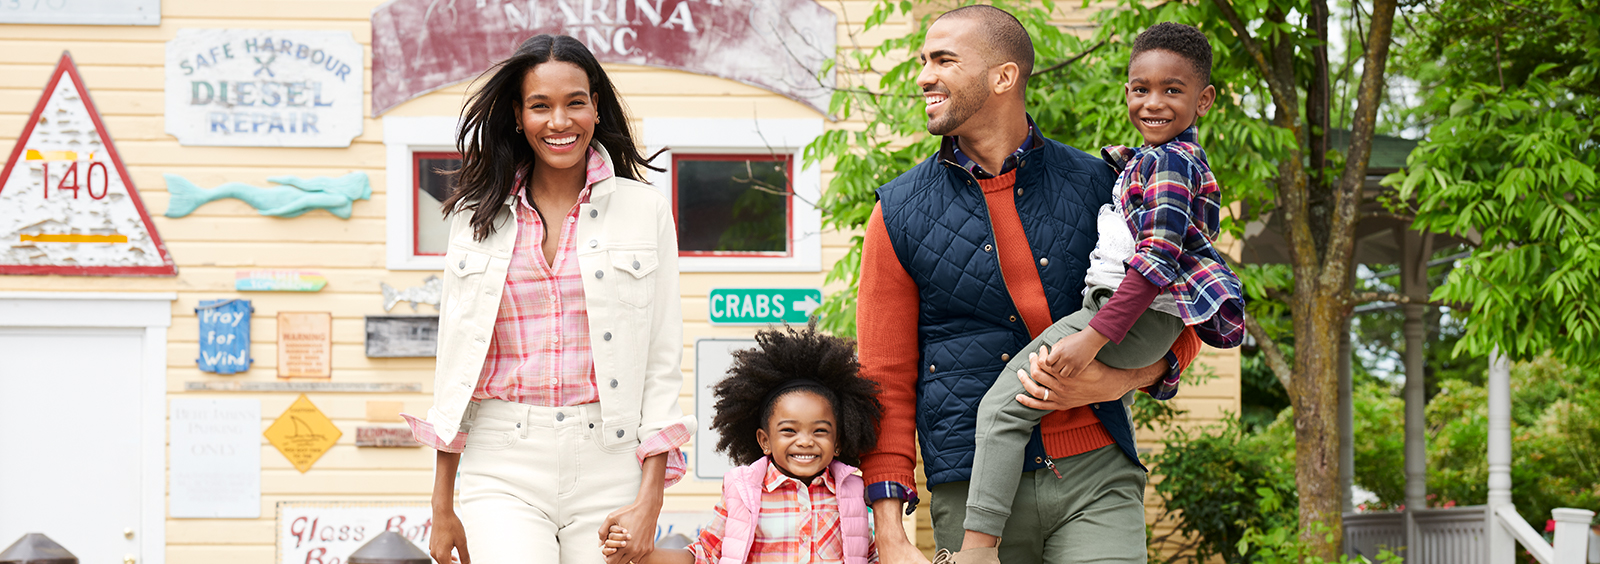 Playful Memorial Day Weekend Outfit Options for the Whole Family